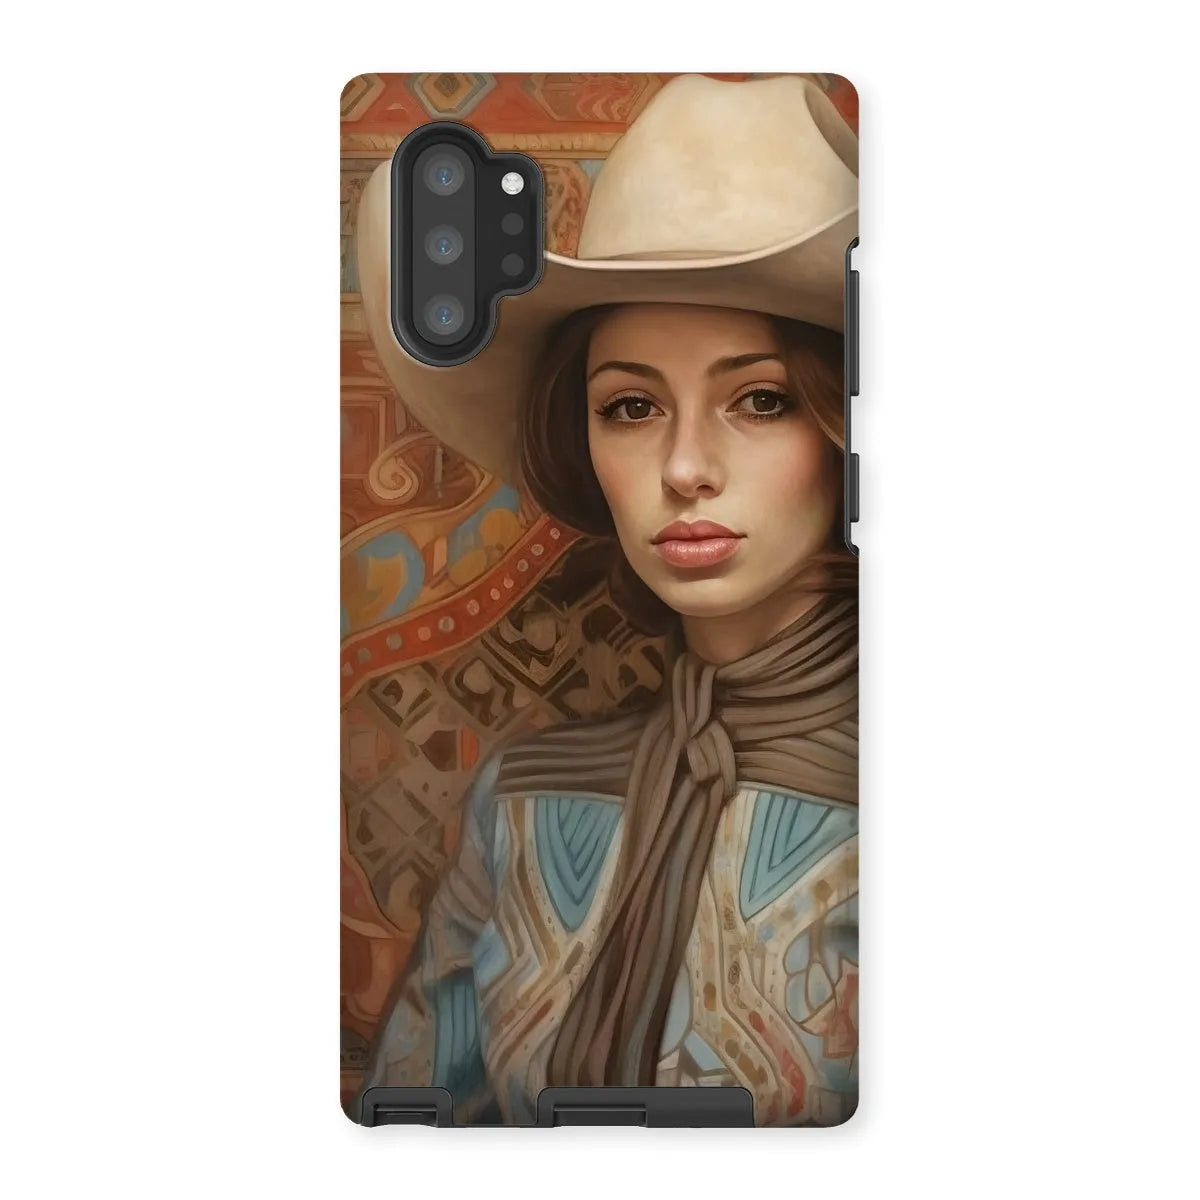 Anahita The Lesbian Cowgirl - Sapphic Art Phone Case - Samsung Galaxy Note 10p / Matte - Mobile Phone Cases - Aesthetic